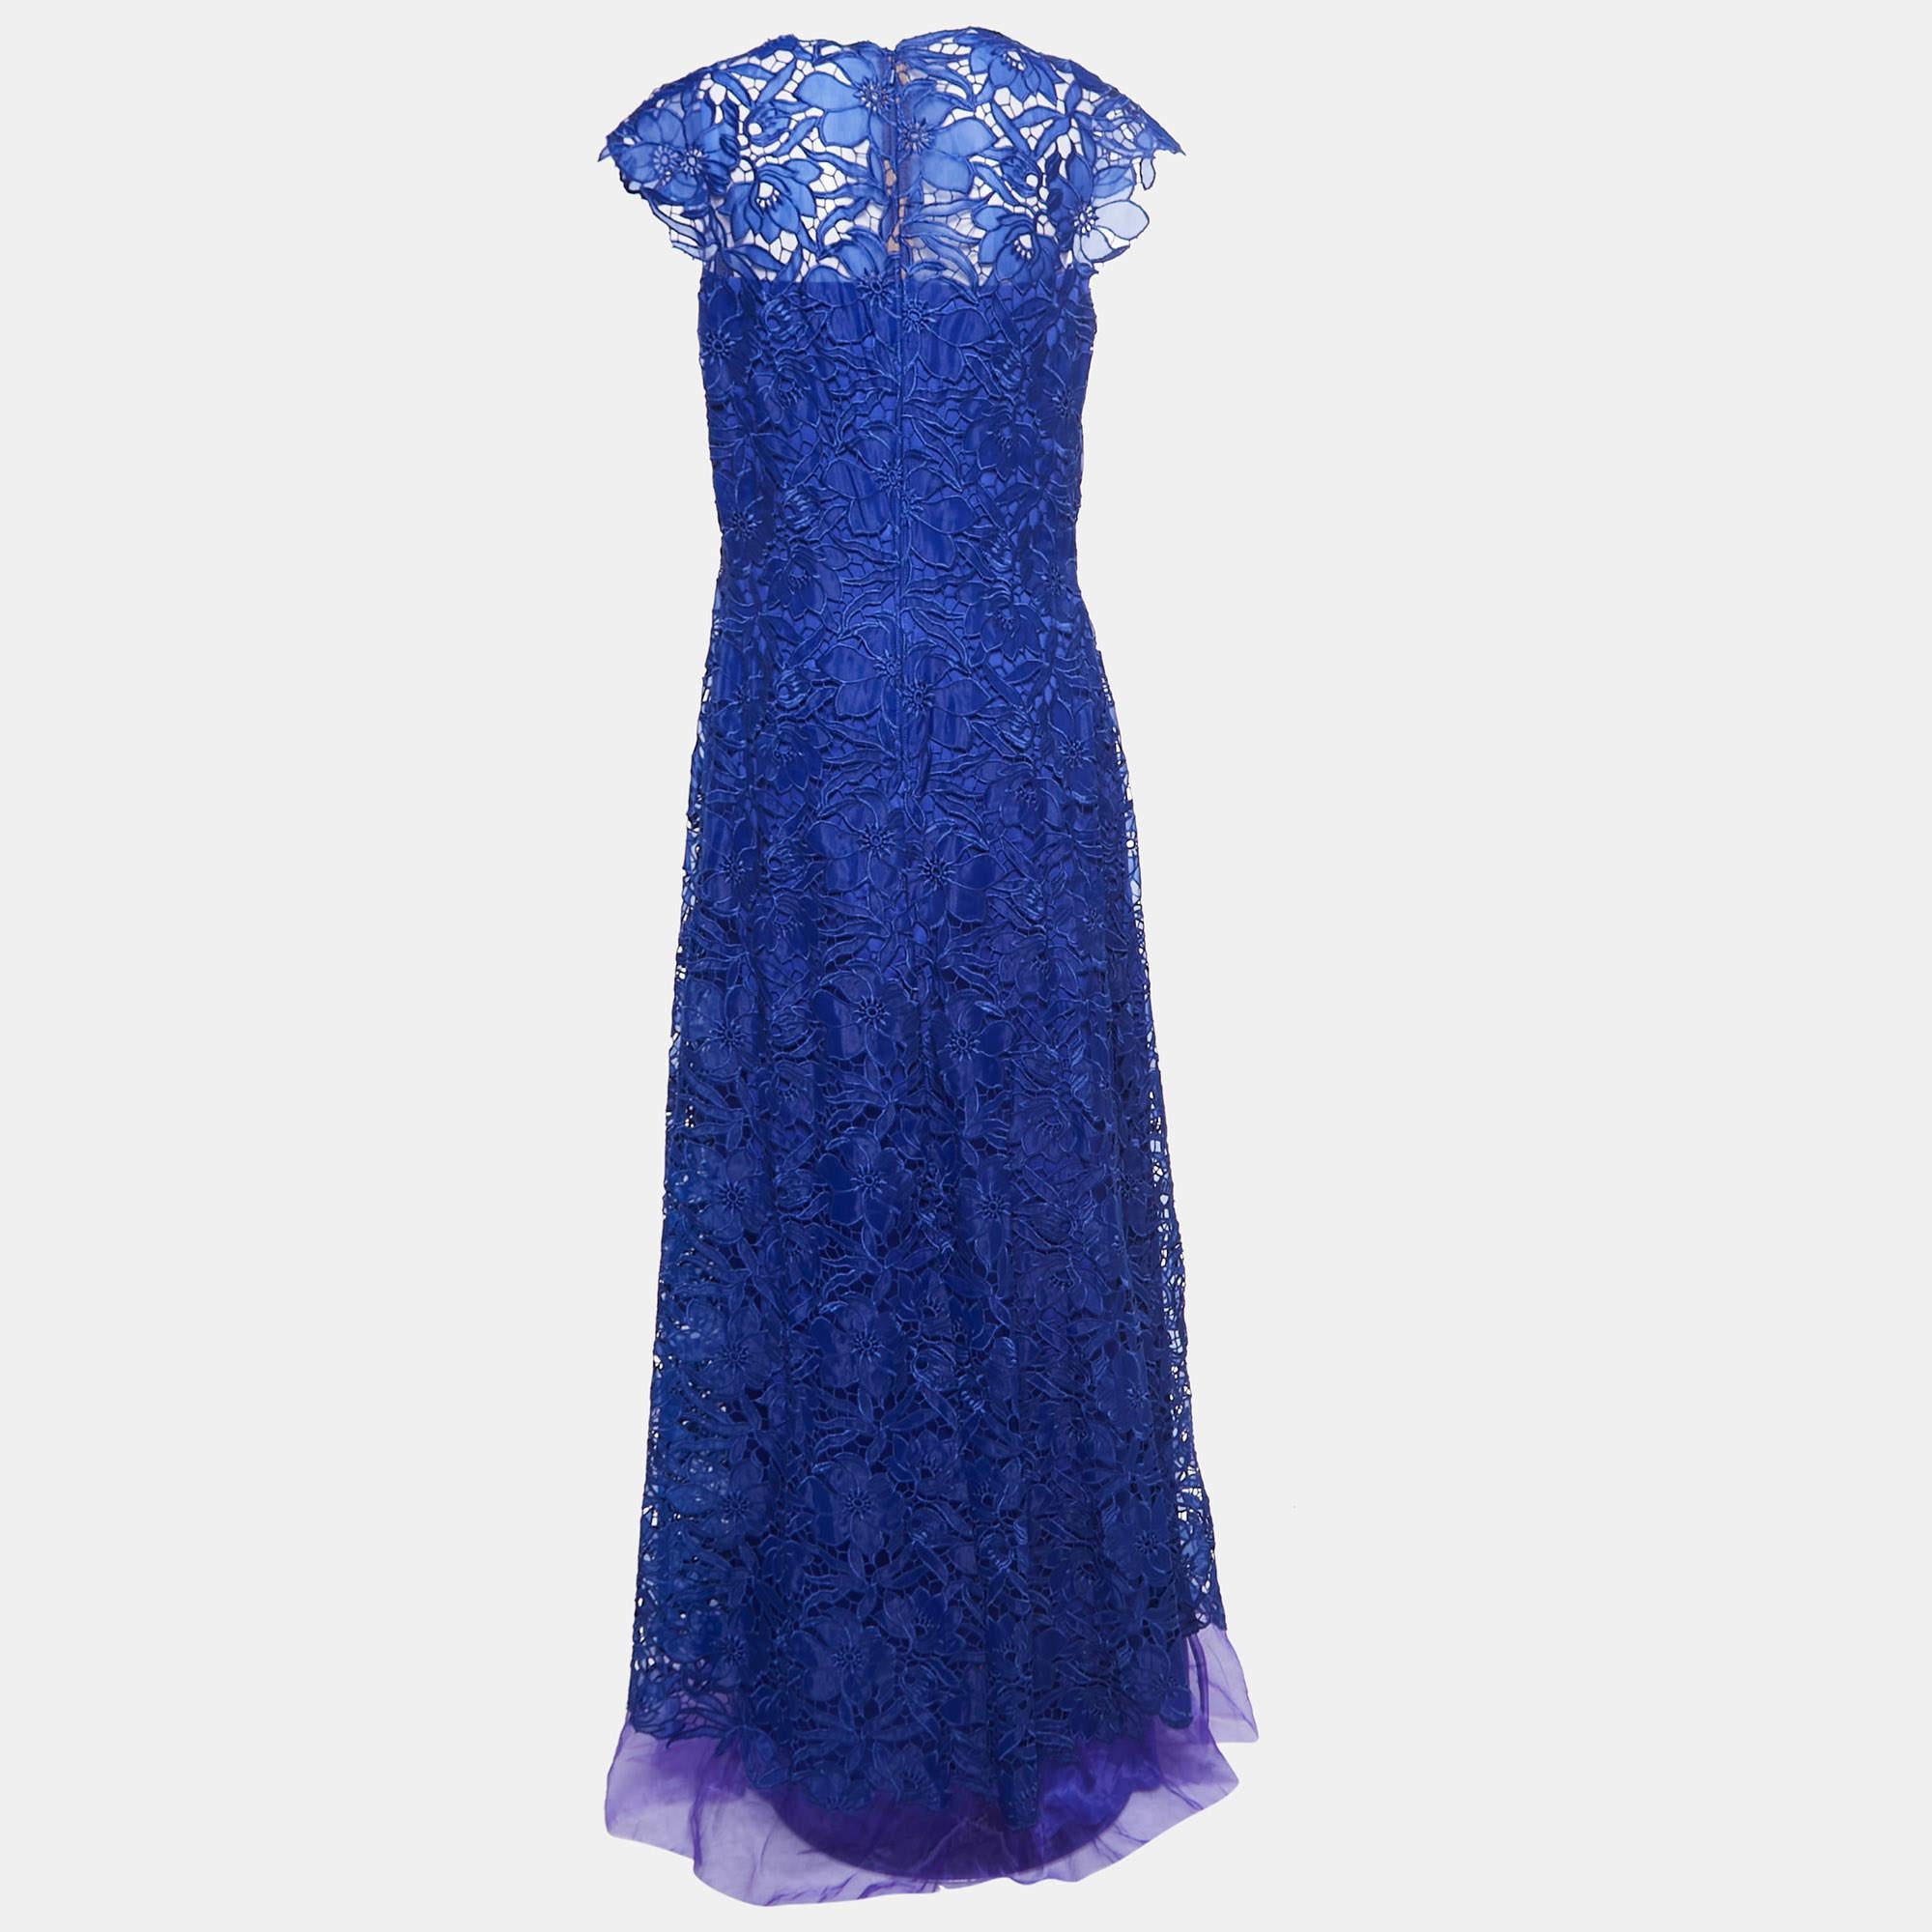 For all evening soirées and high-affair parties, a gown like this makes sure you look the best of all. Tailored into a superb fit and style, this gown is elevated with a stunning neckline and a beautiful hue. Bring home this lovely gown today.

